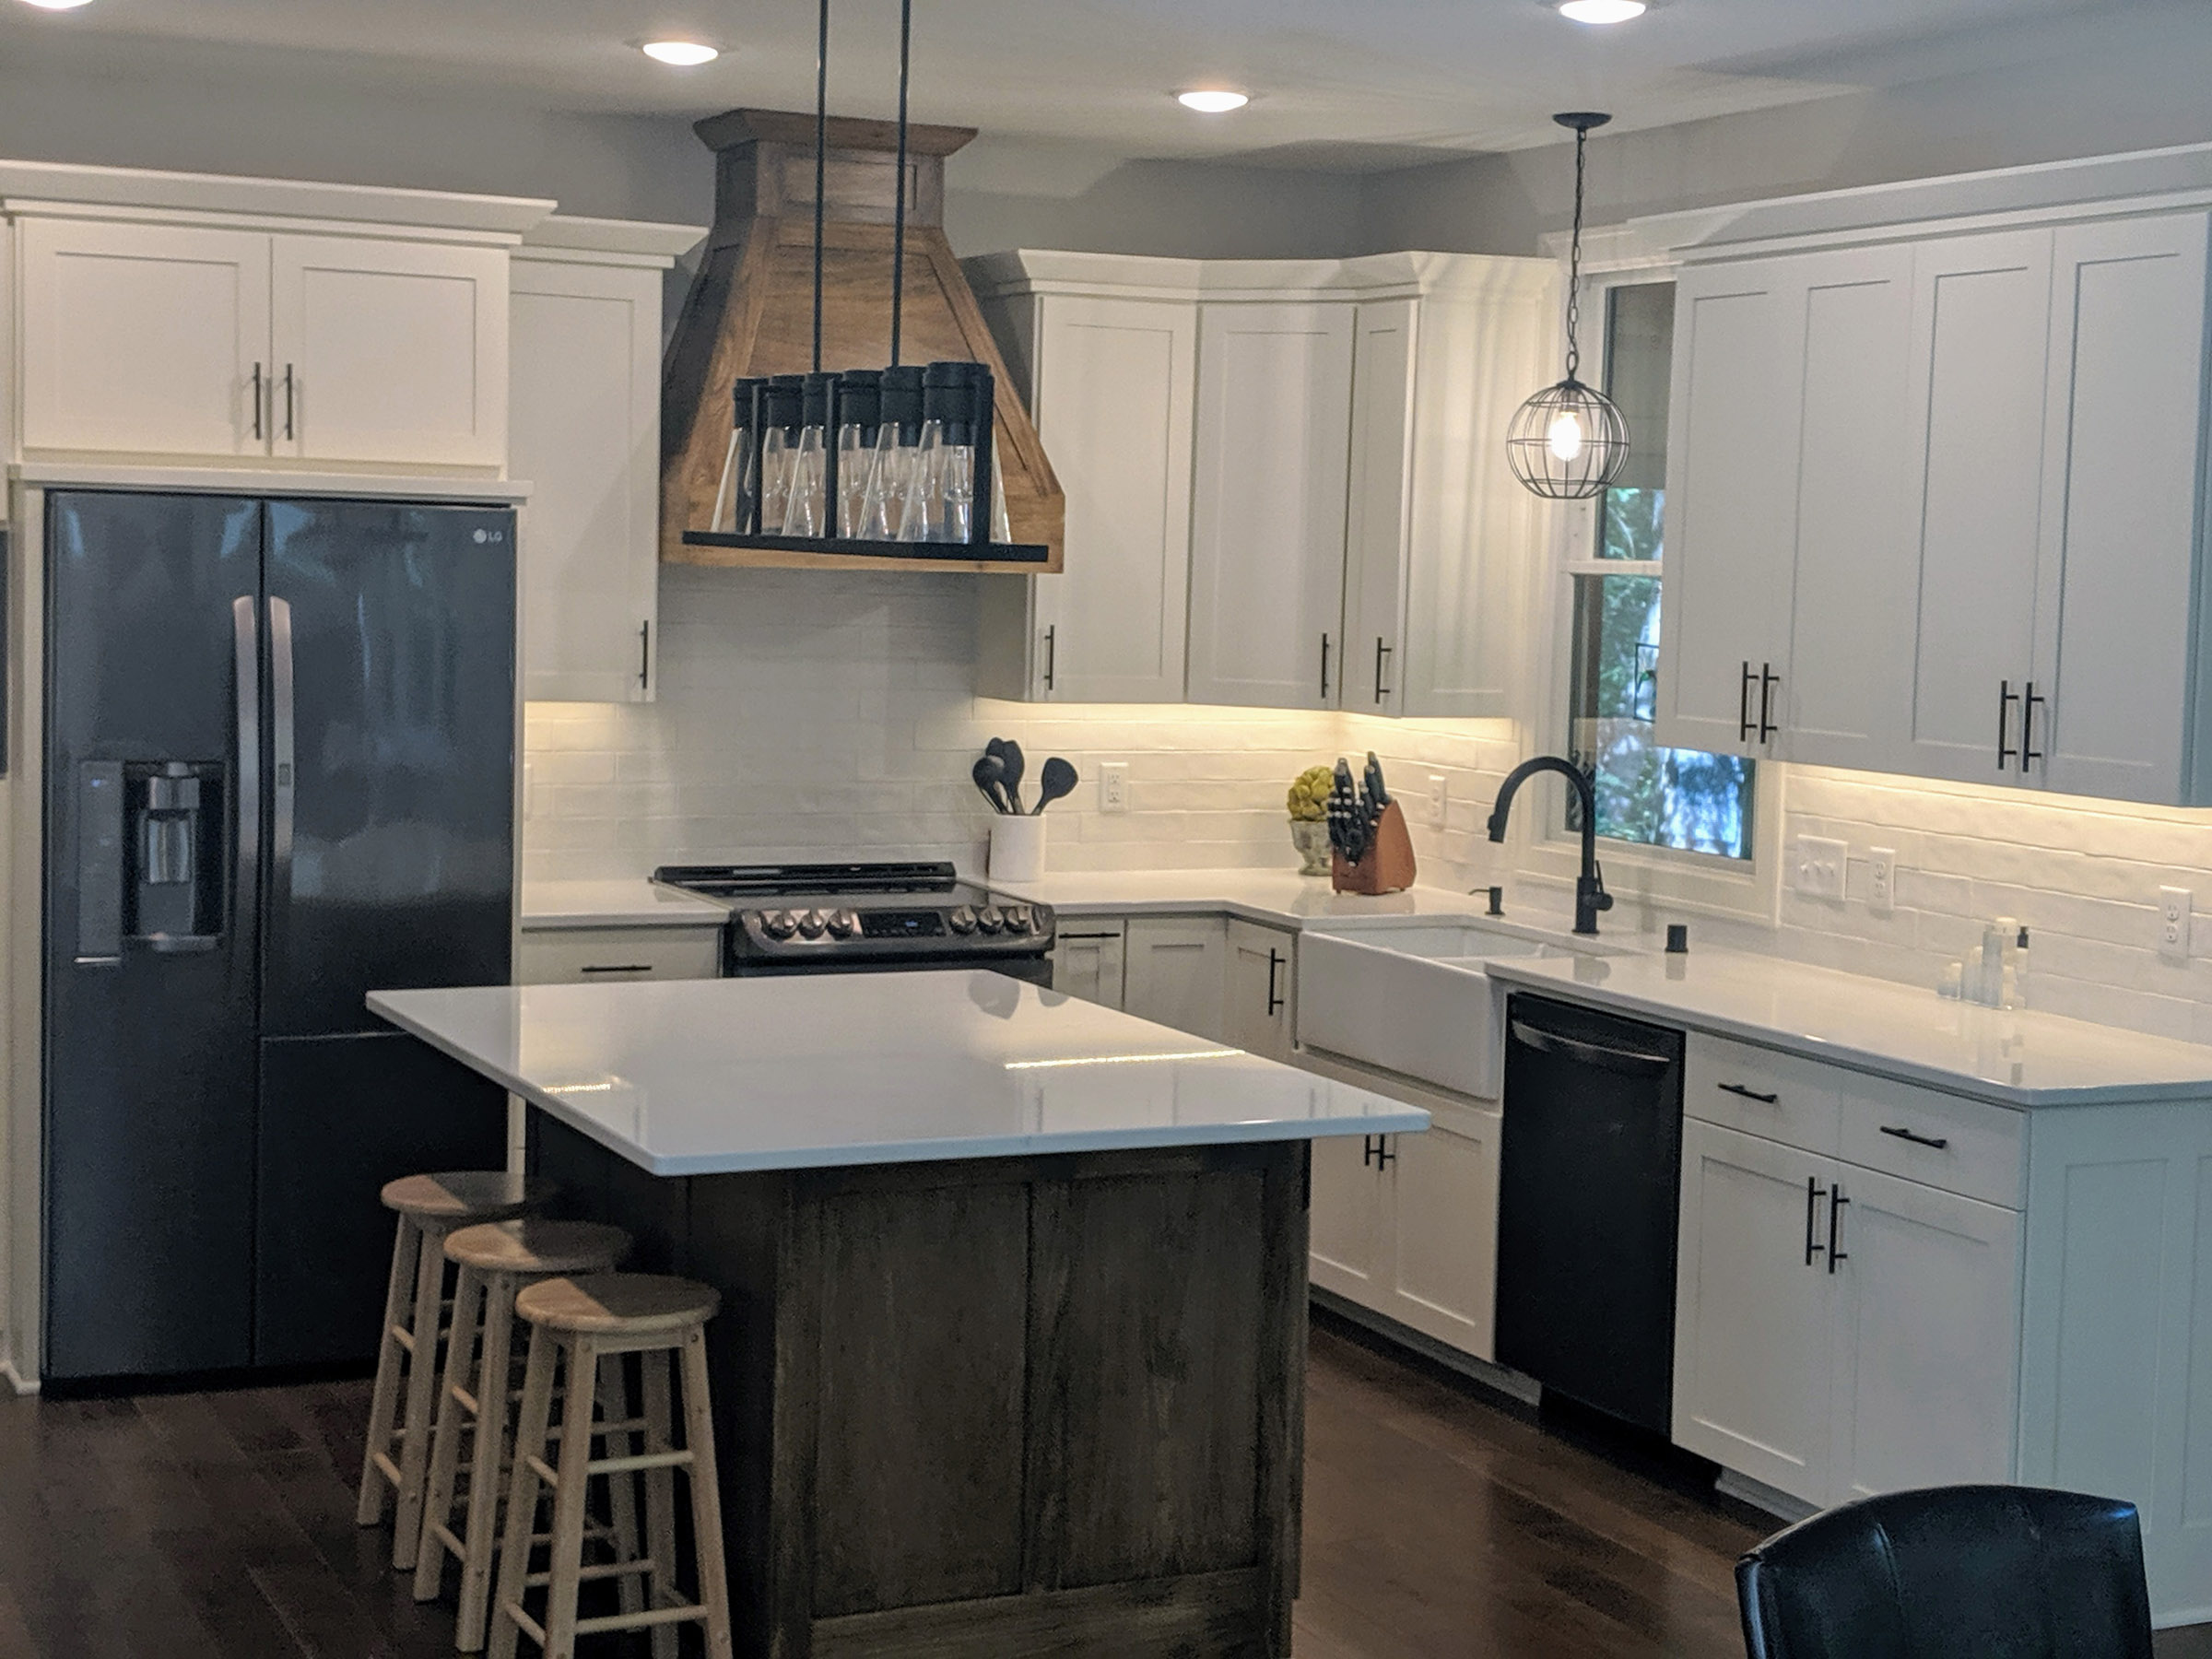 Subway tile and under cabinet lighting